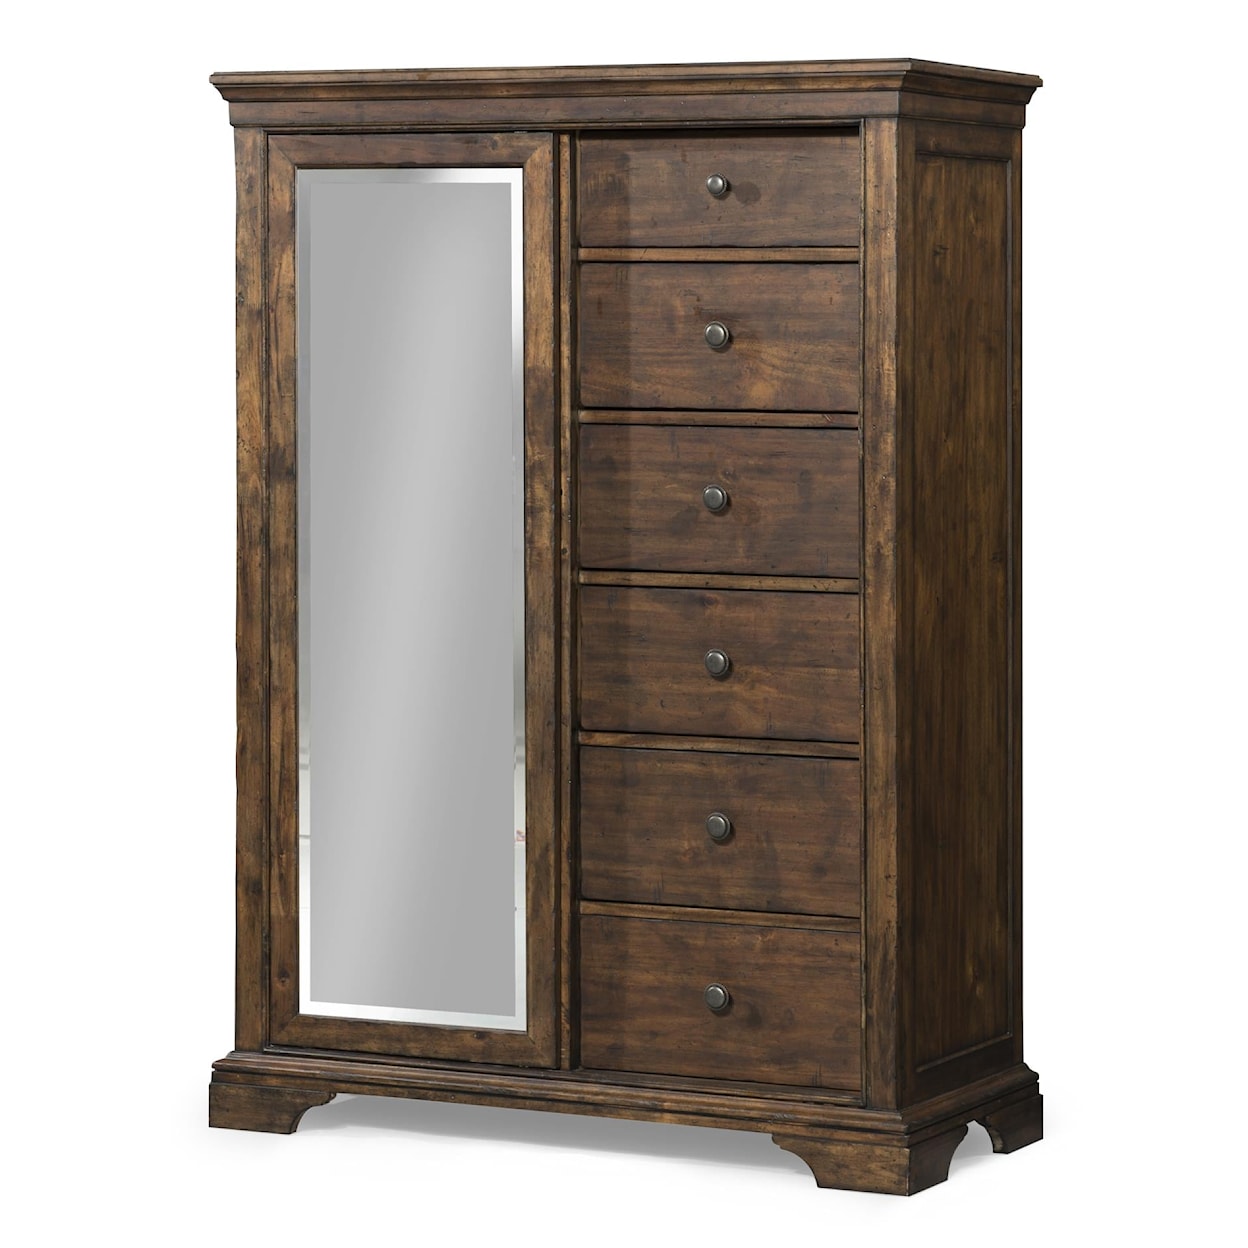 Trisha Yearwood Home Collection by Legacy Classic Trisha Yearwood Home Tulsa Door Chest